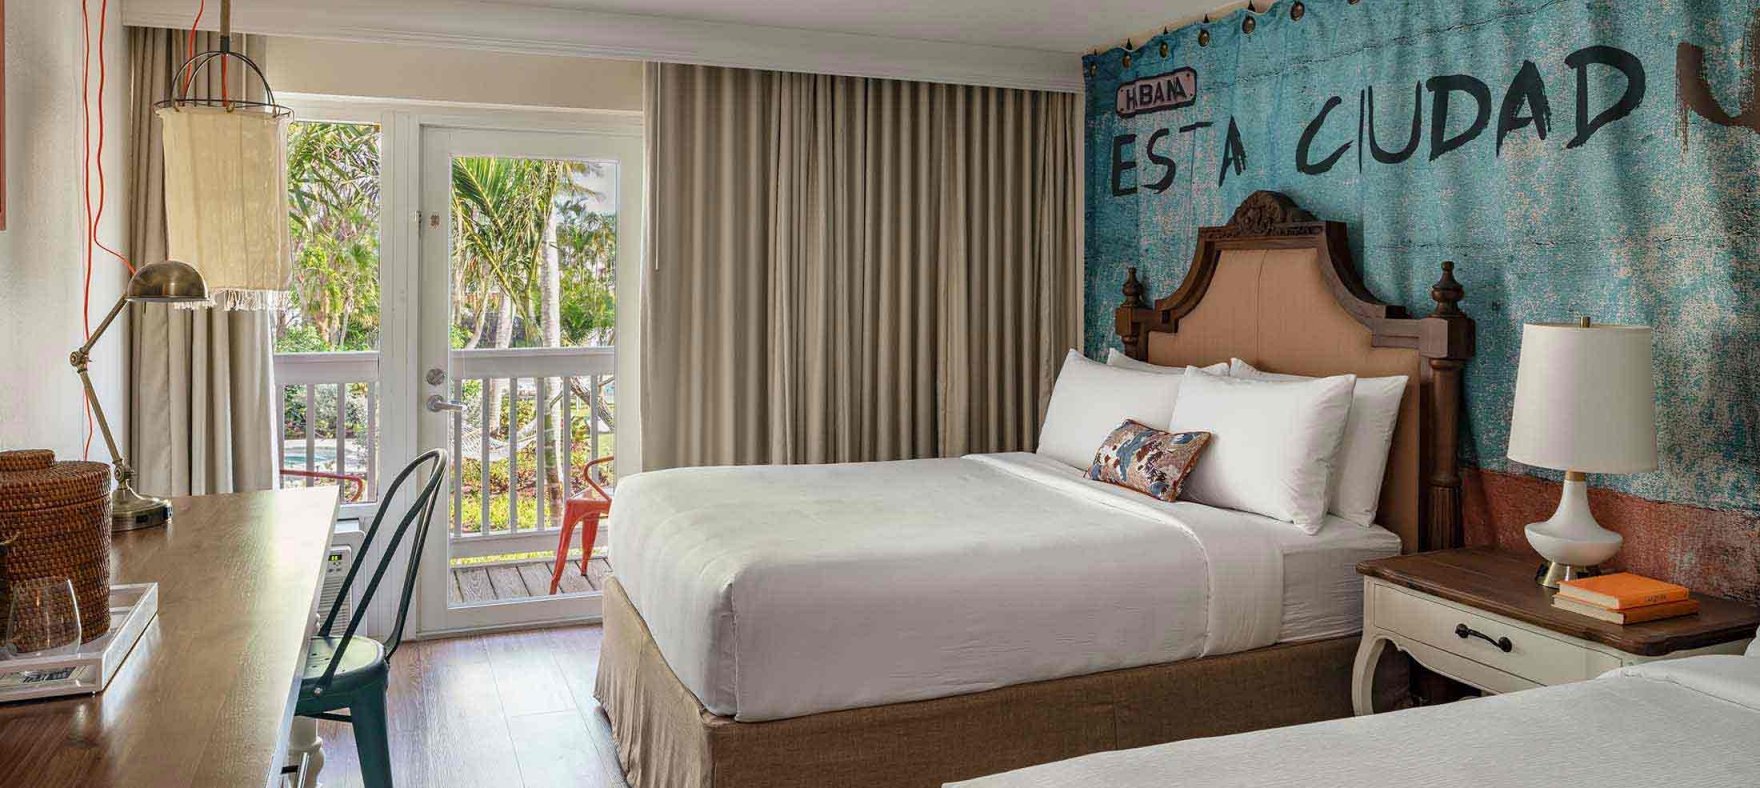 Twin queen-sized beds with a bedside table in between overlooking a desk